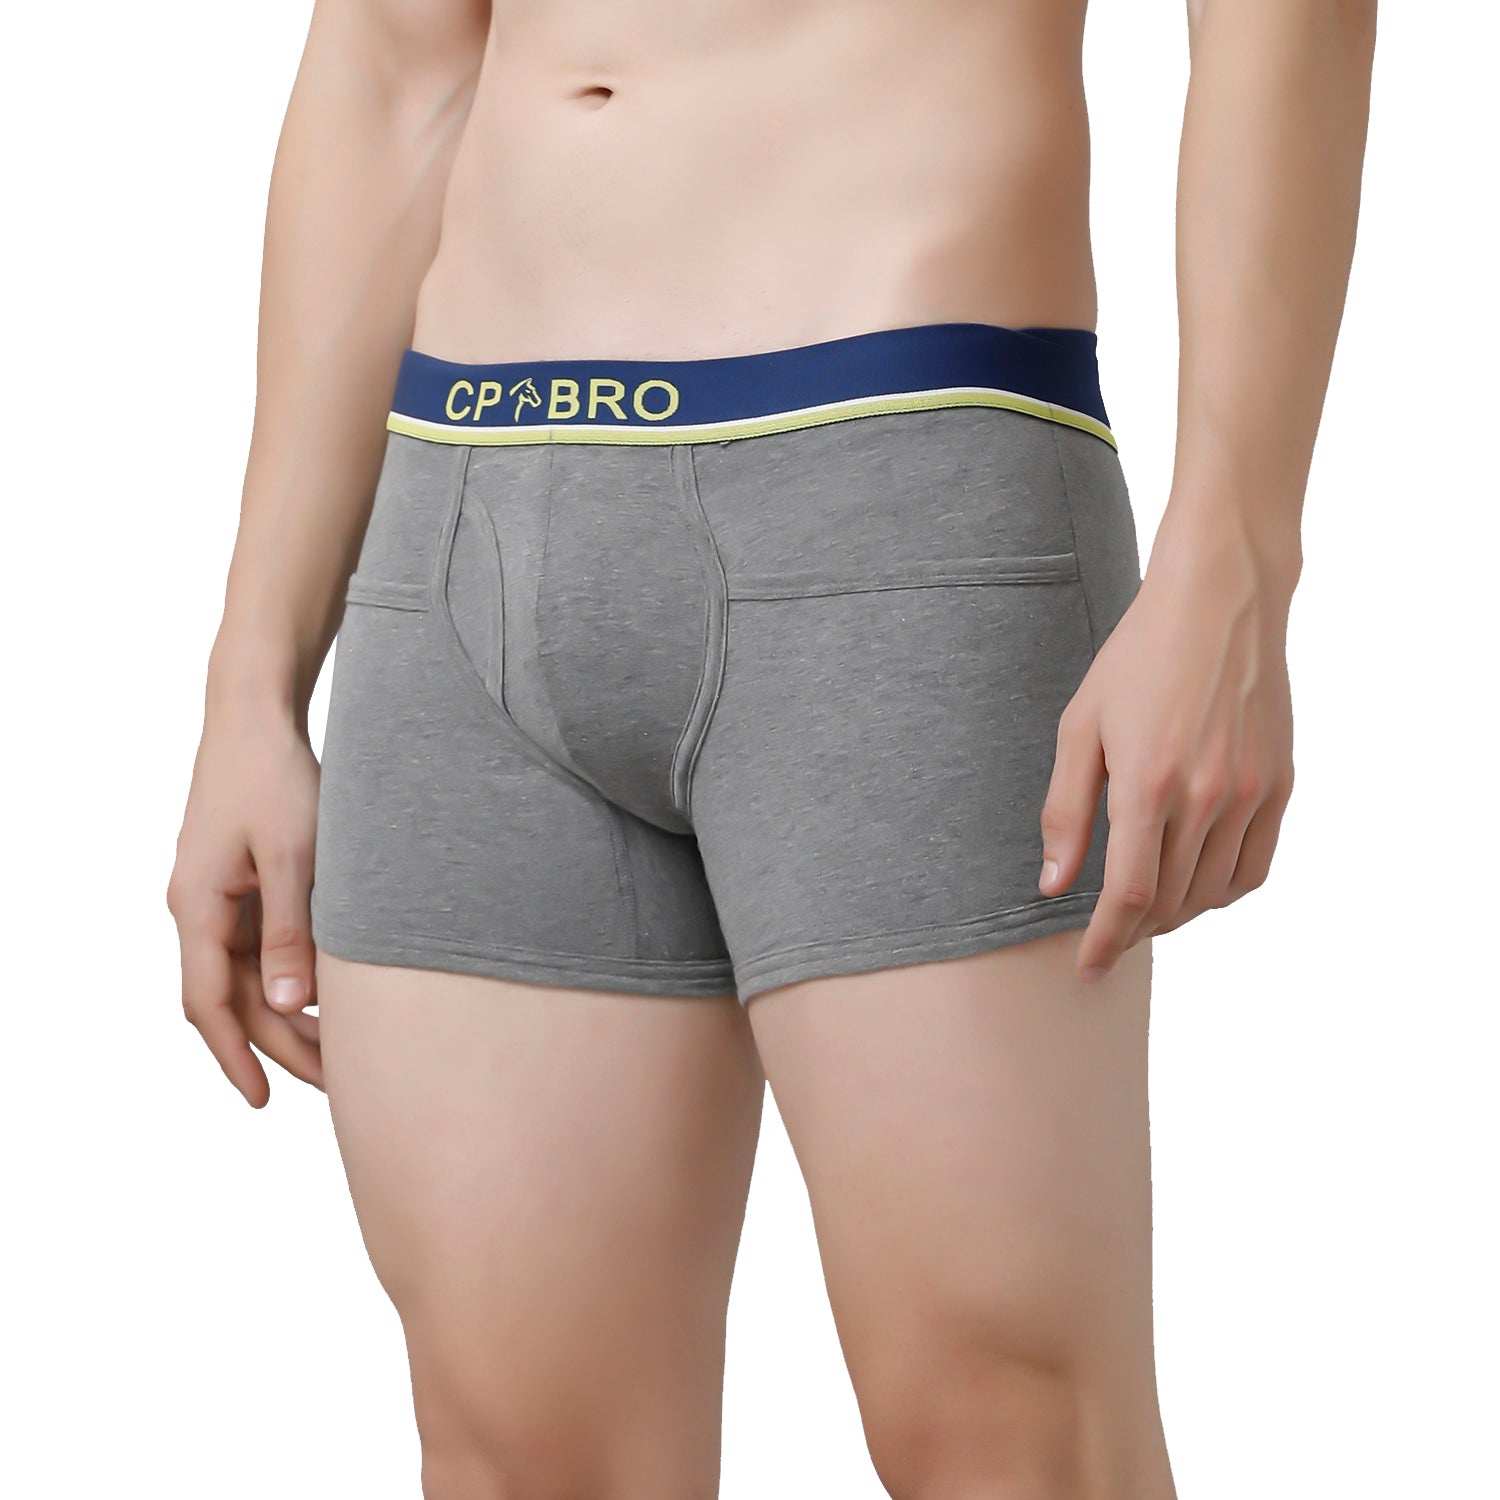 CP BRO Men's Solid Trunks with Exposed Waistband Value Pack - Grey (Pack of 2)